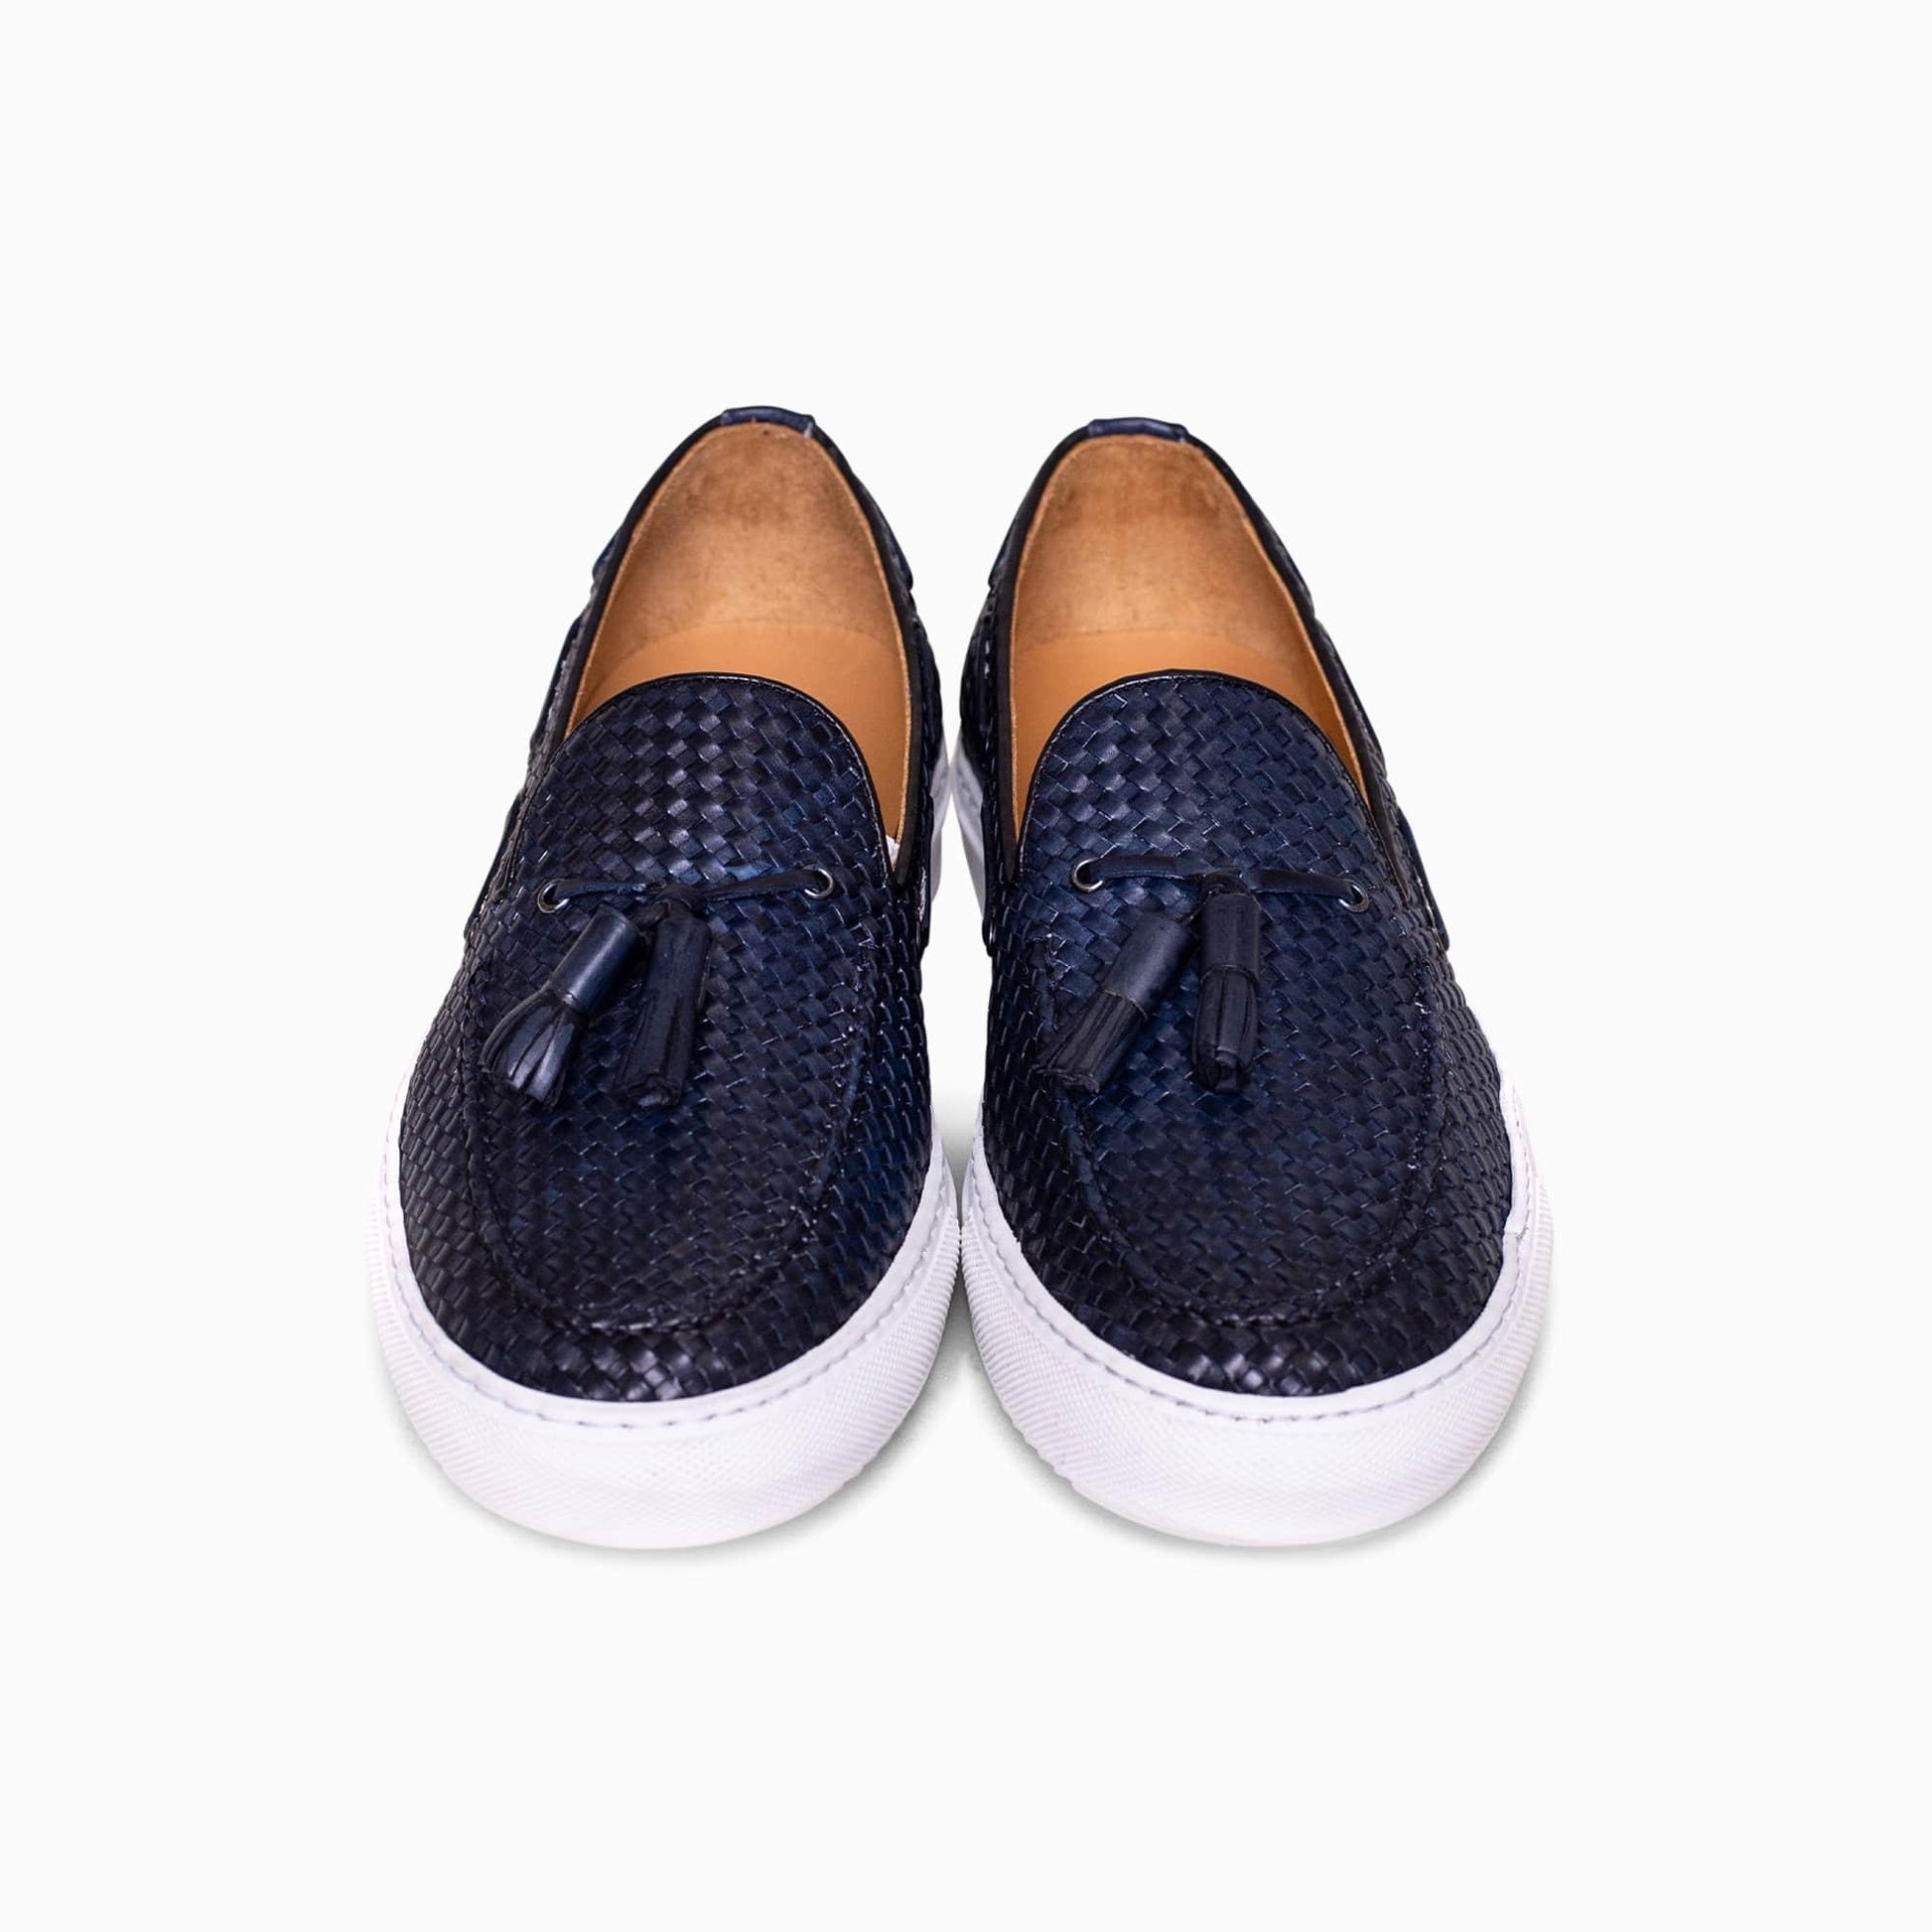 Signature Loafer Navy - JUCAN GmbH